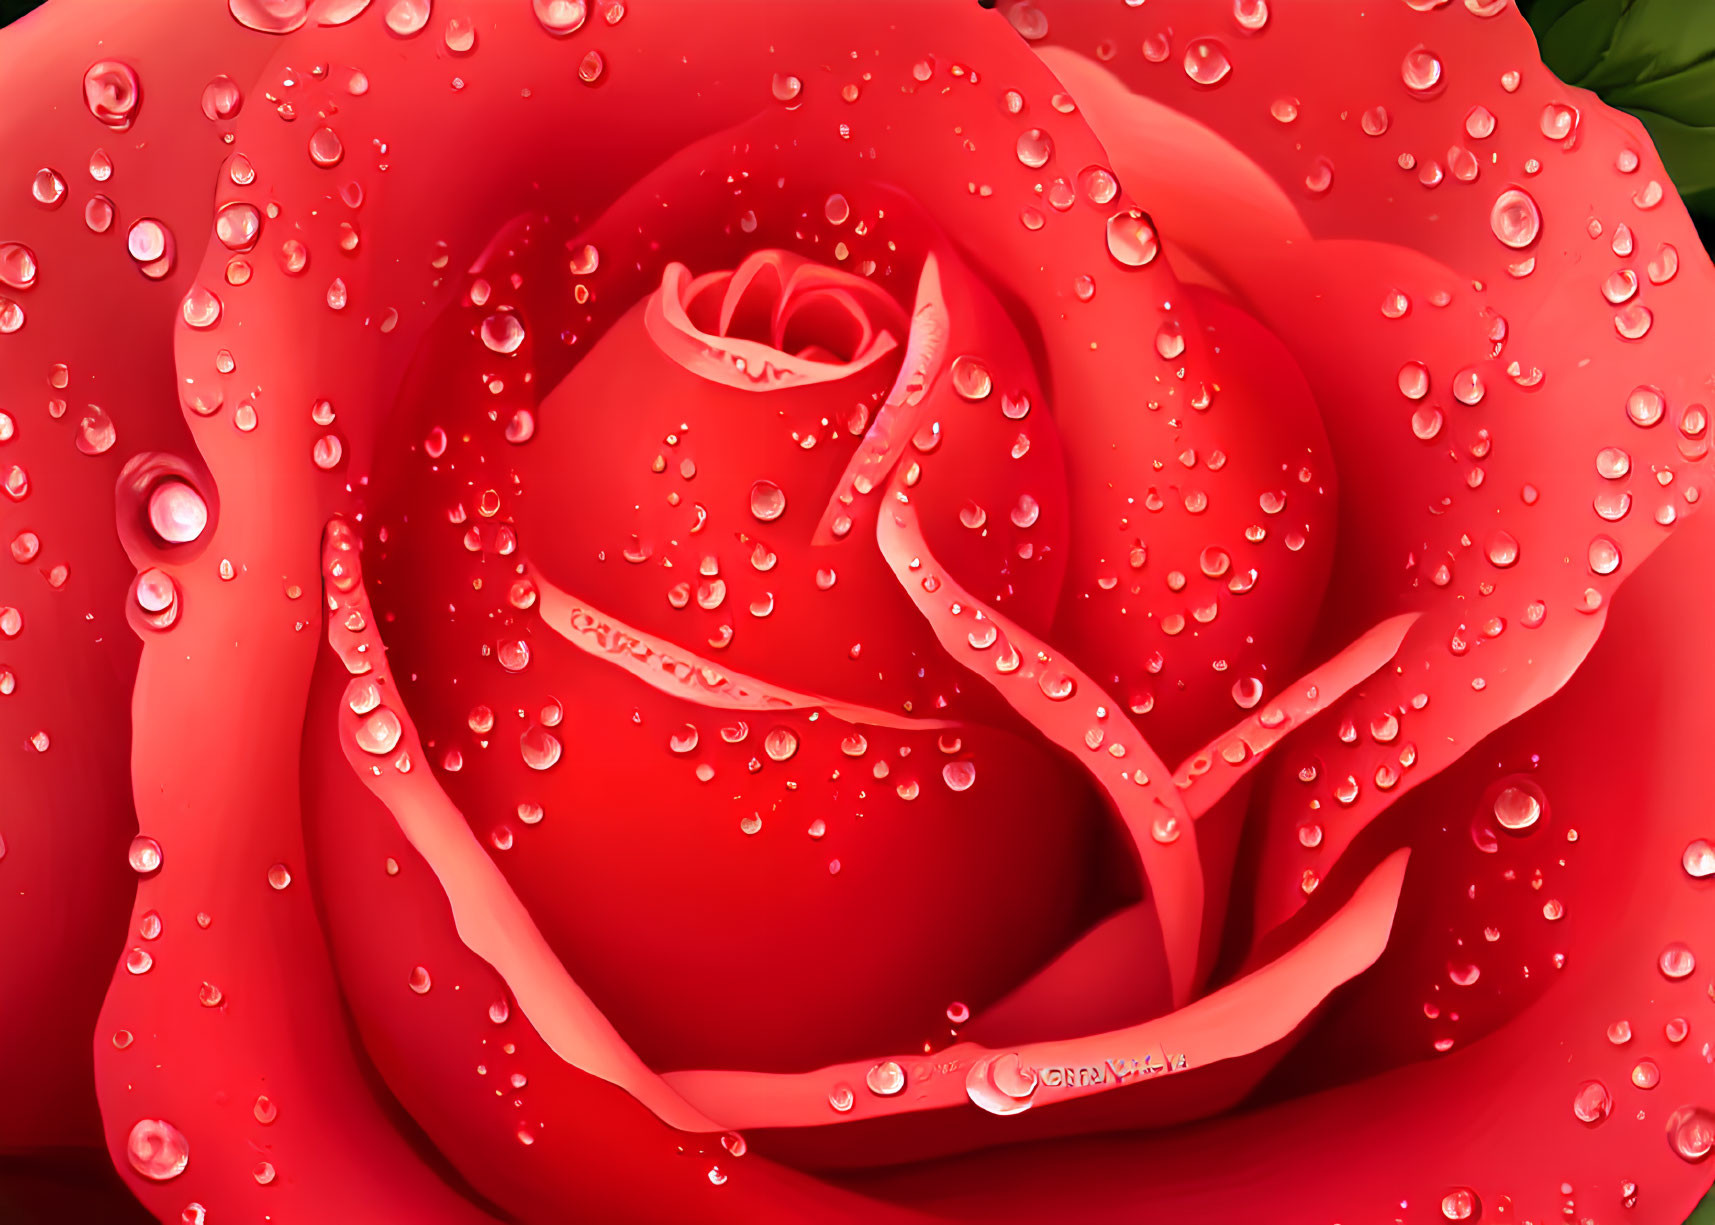 Vibrant red rose with dewdrops in close-up shot